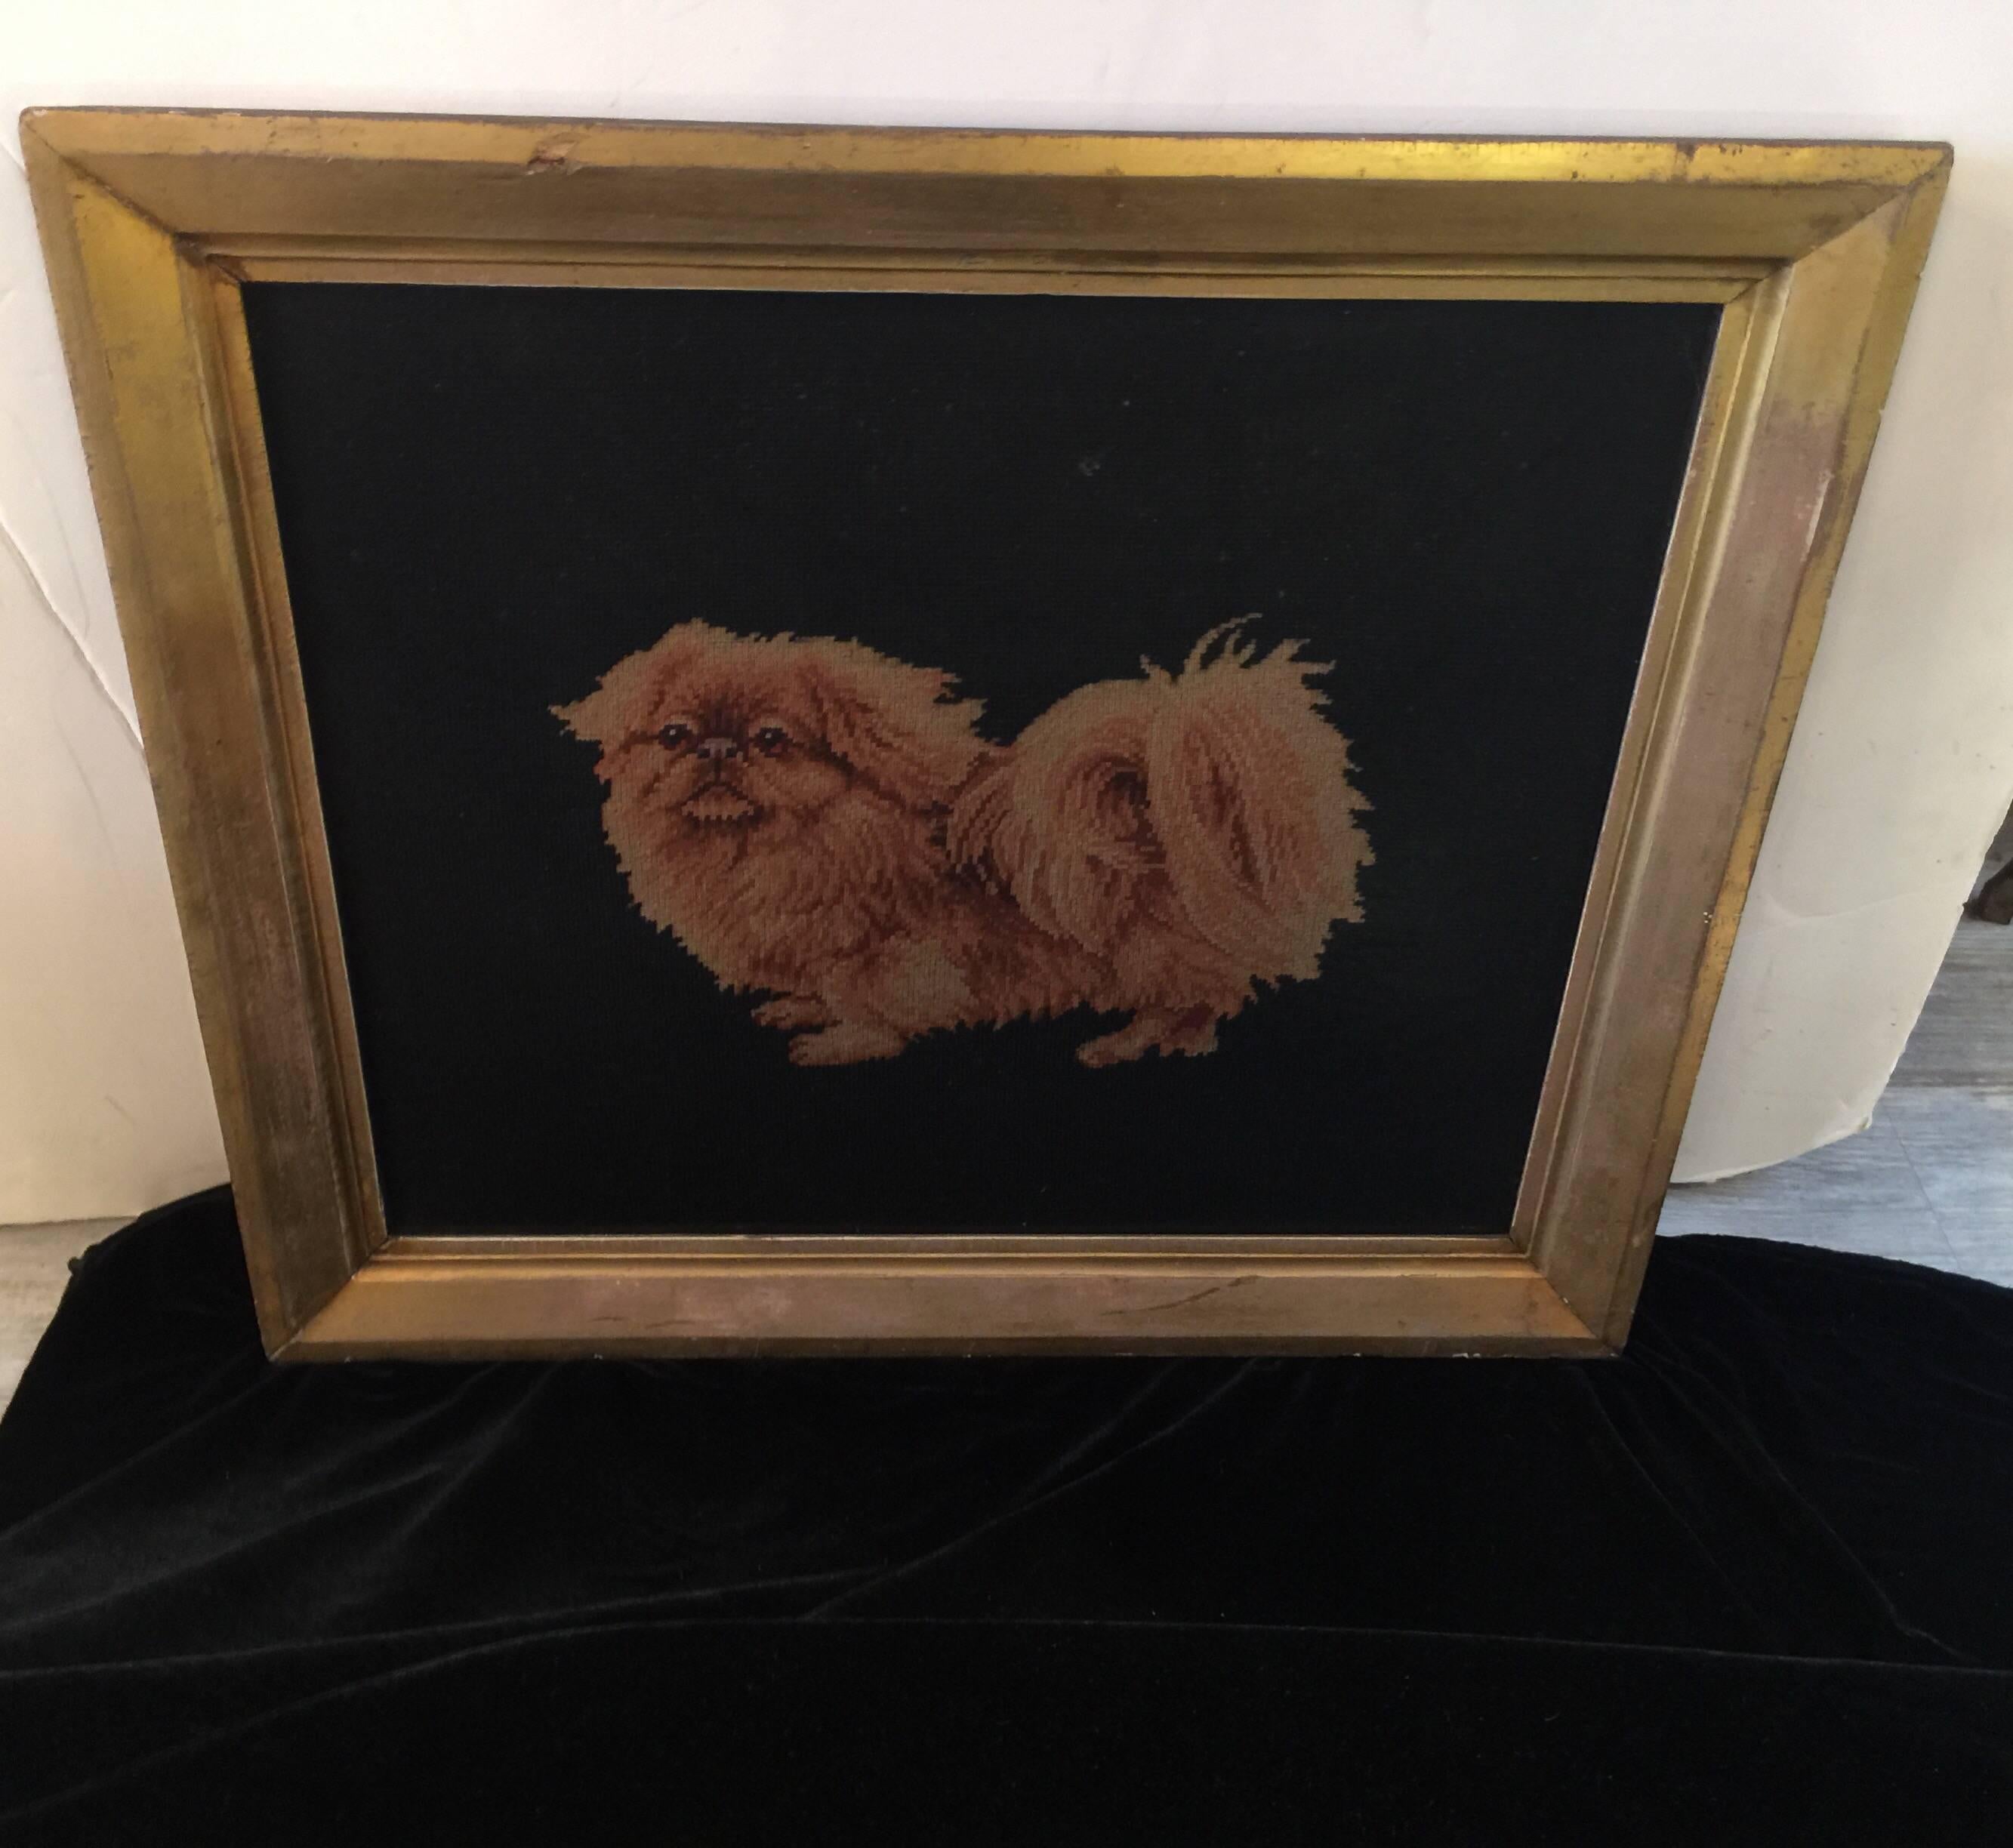 Antique petit point Pekingese dog with needlepoint background in a gold leaf frame. Has original glass and in very good original condition, circa 1890s.